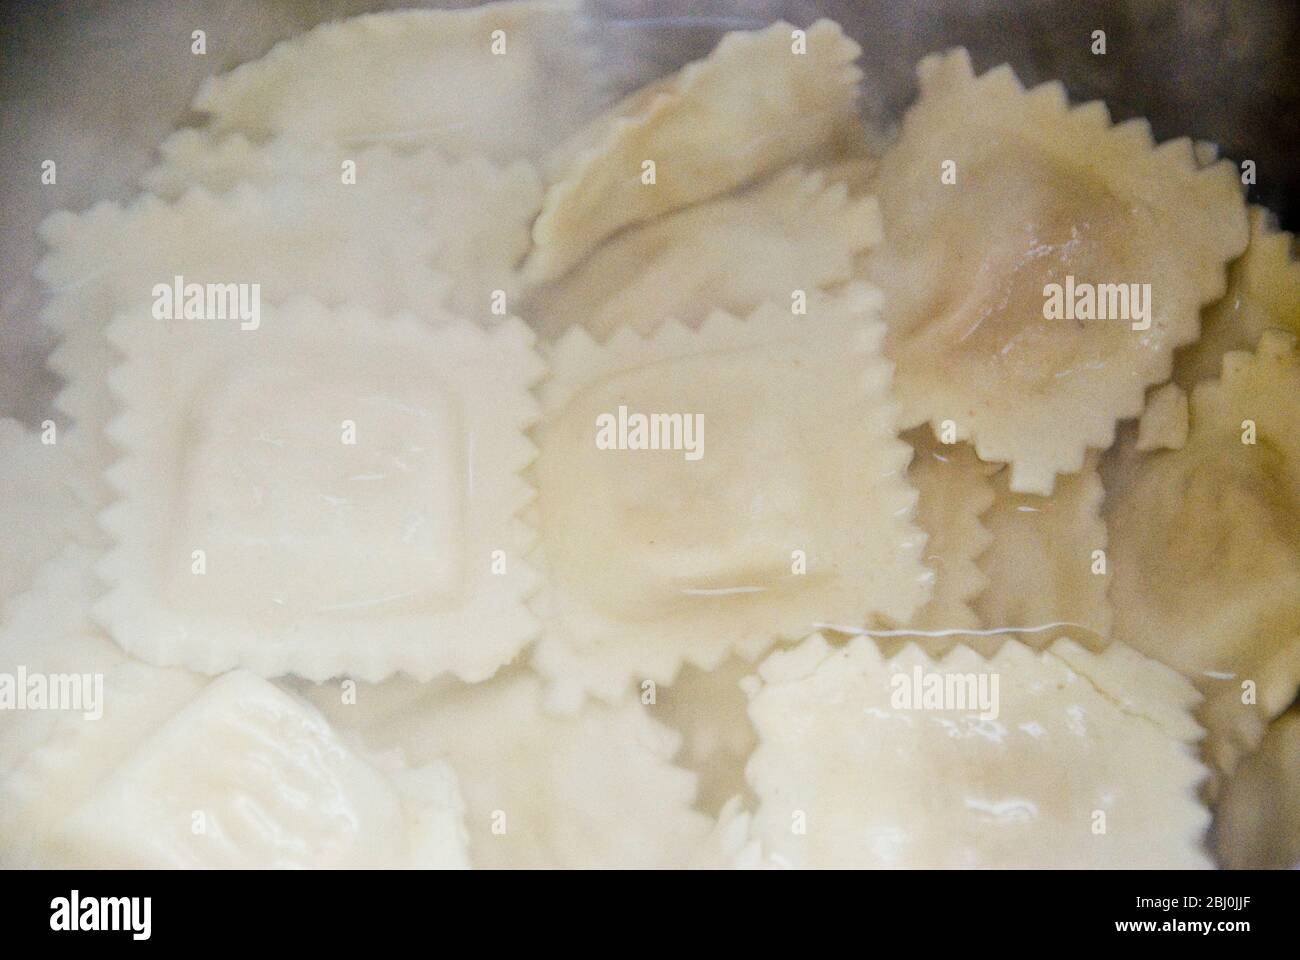 Ravioli being cooked in boiling water in stainless steel pan Stock Photo